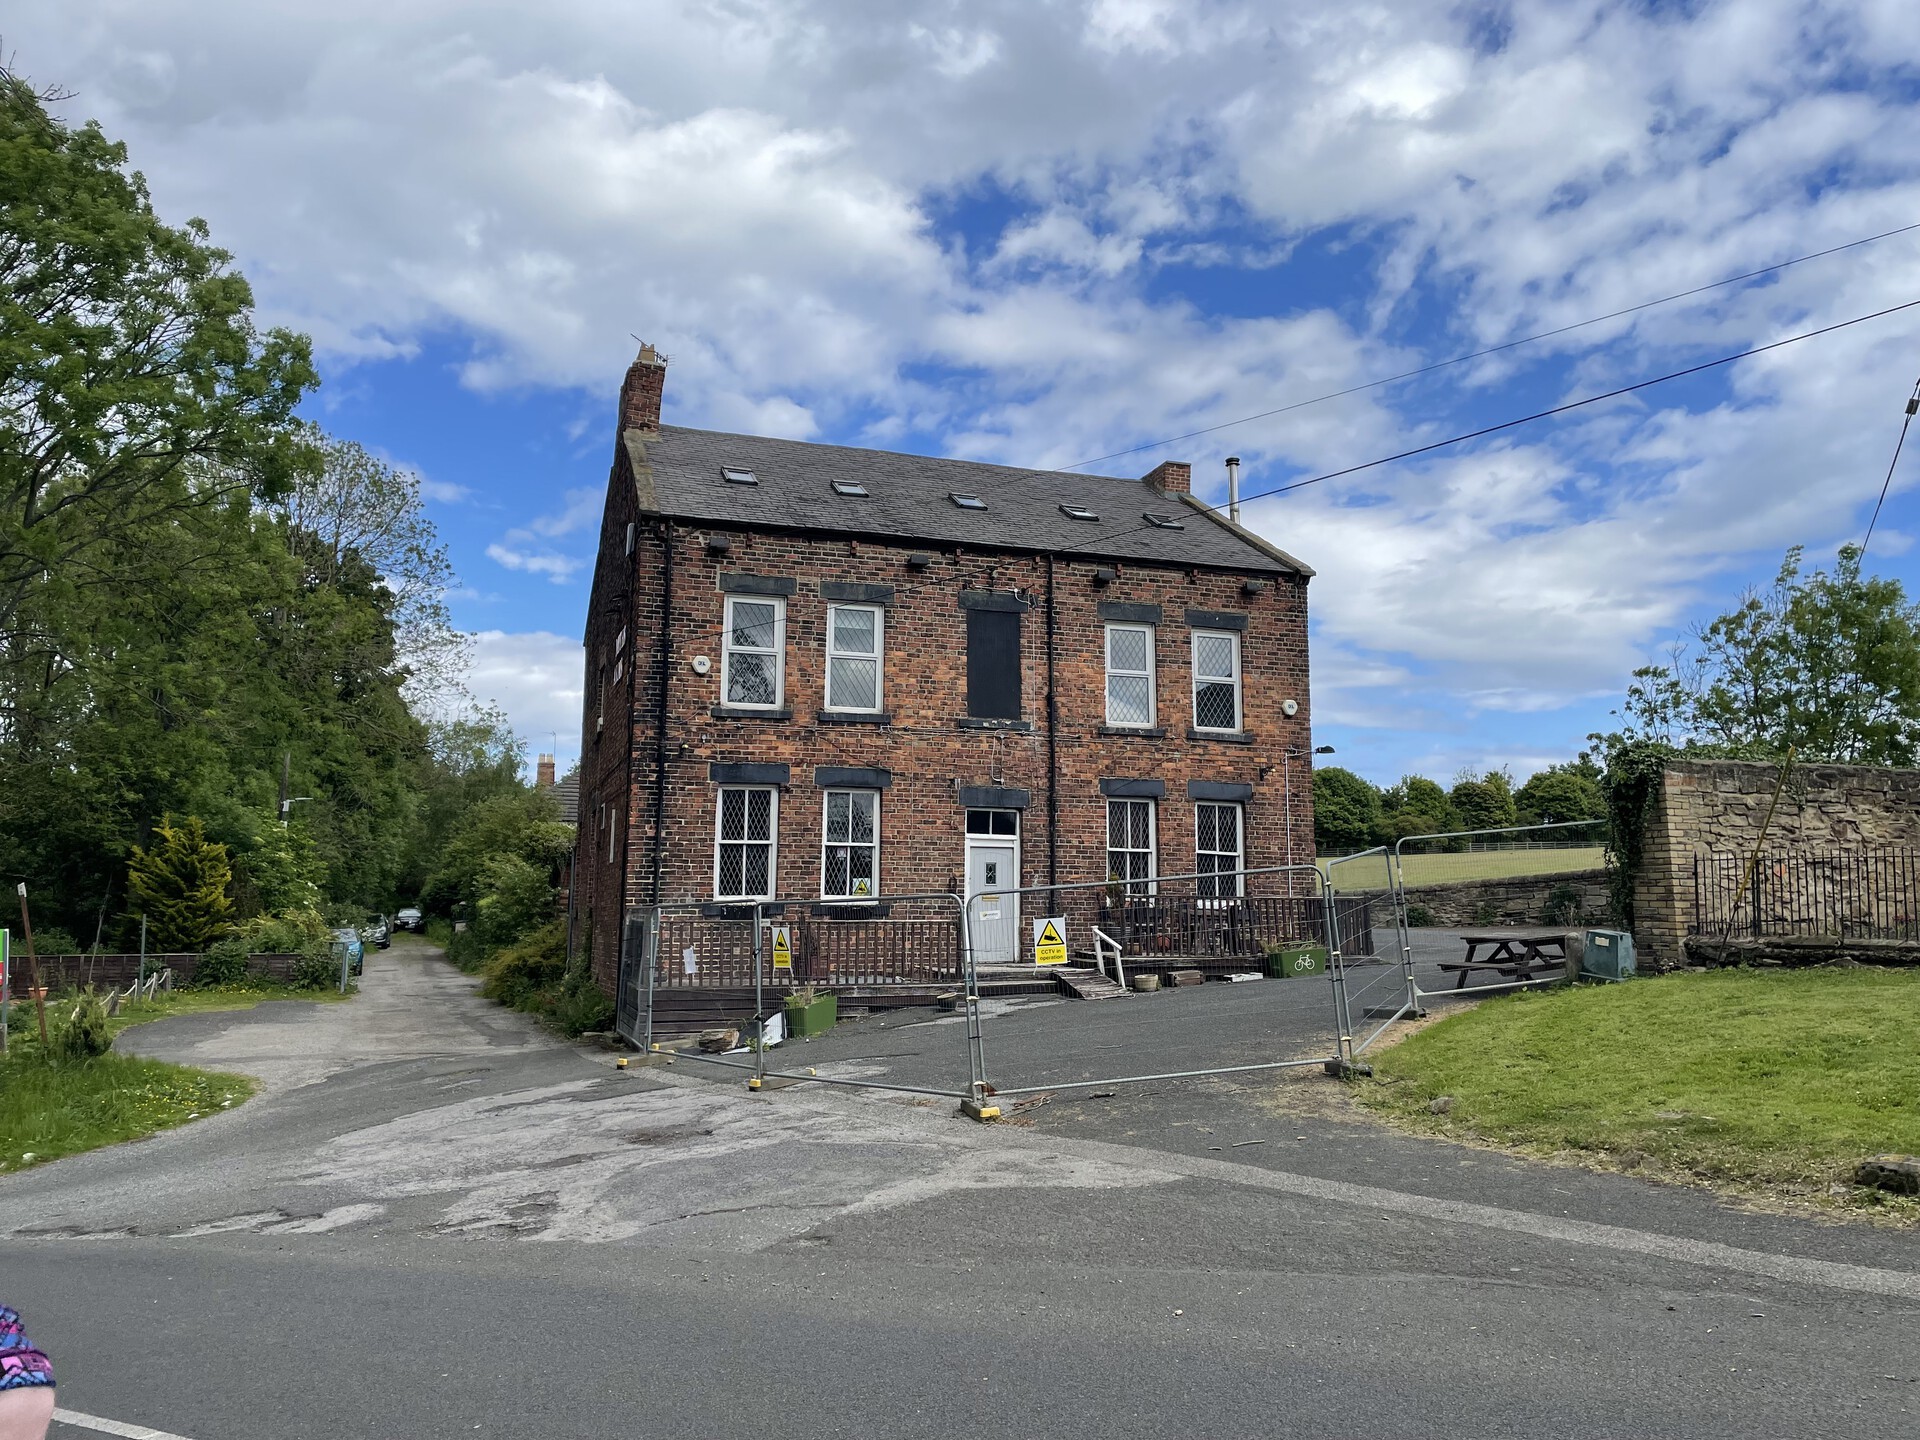 Continuing in the tradition of closed pubs along the Weardale Way, the old Smiths Arms was closed in October 2020 w/ no plans to reopen anytime soon